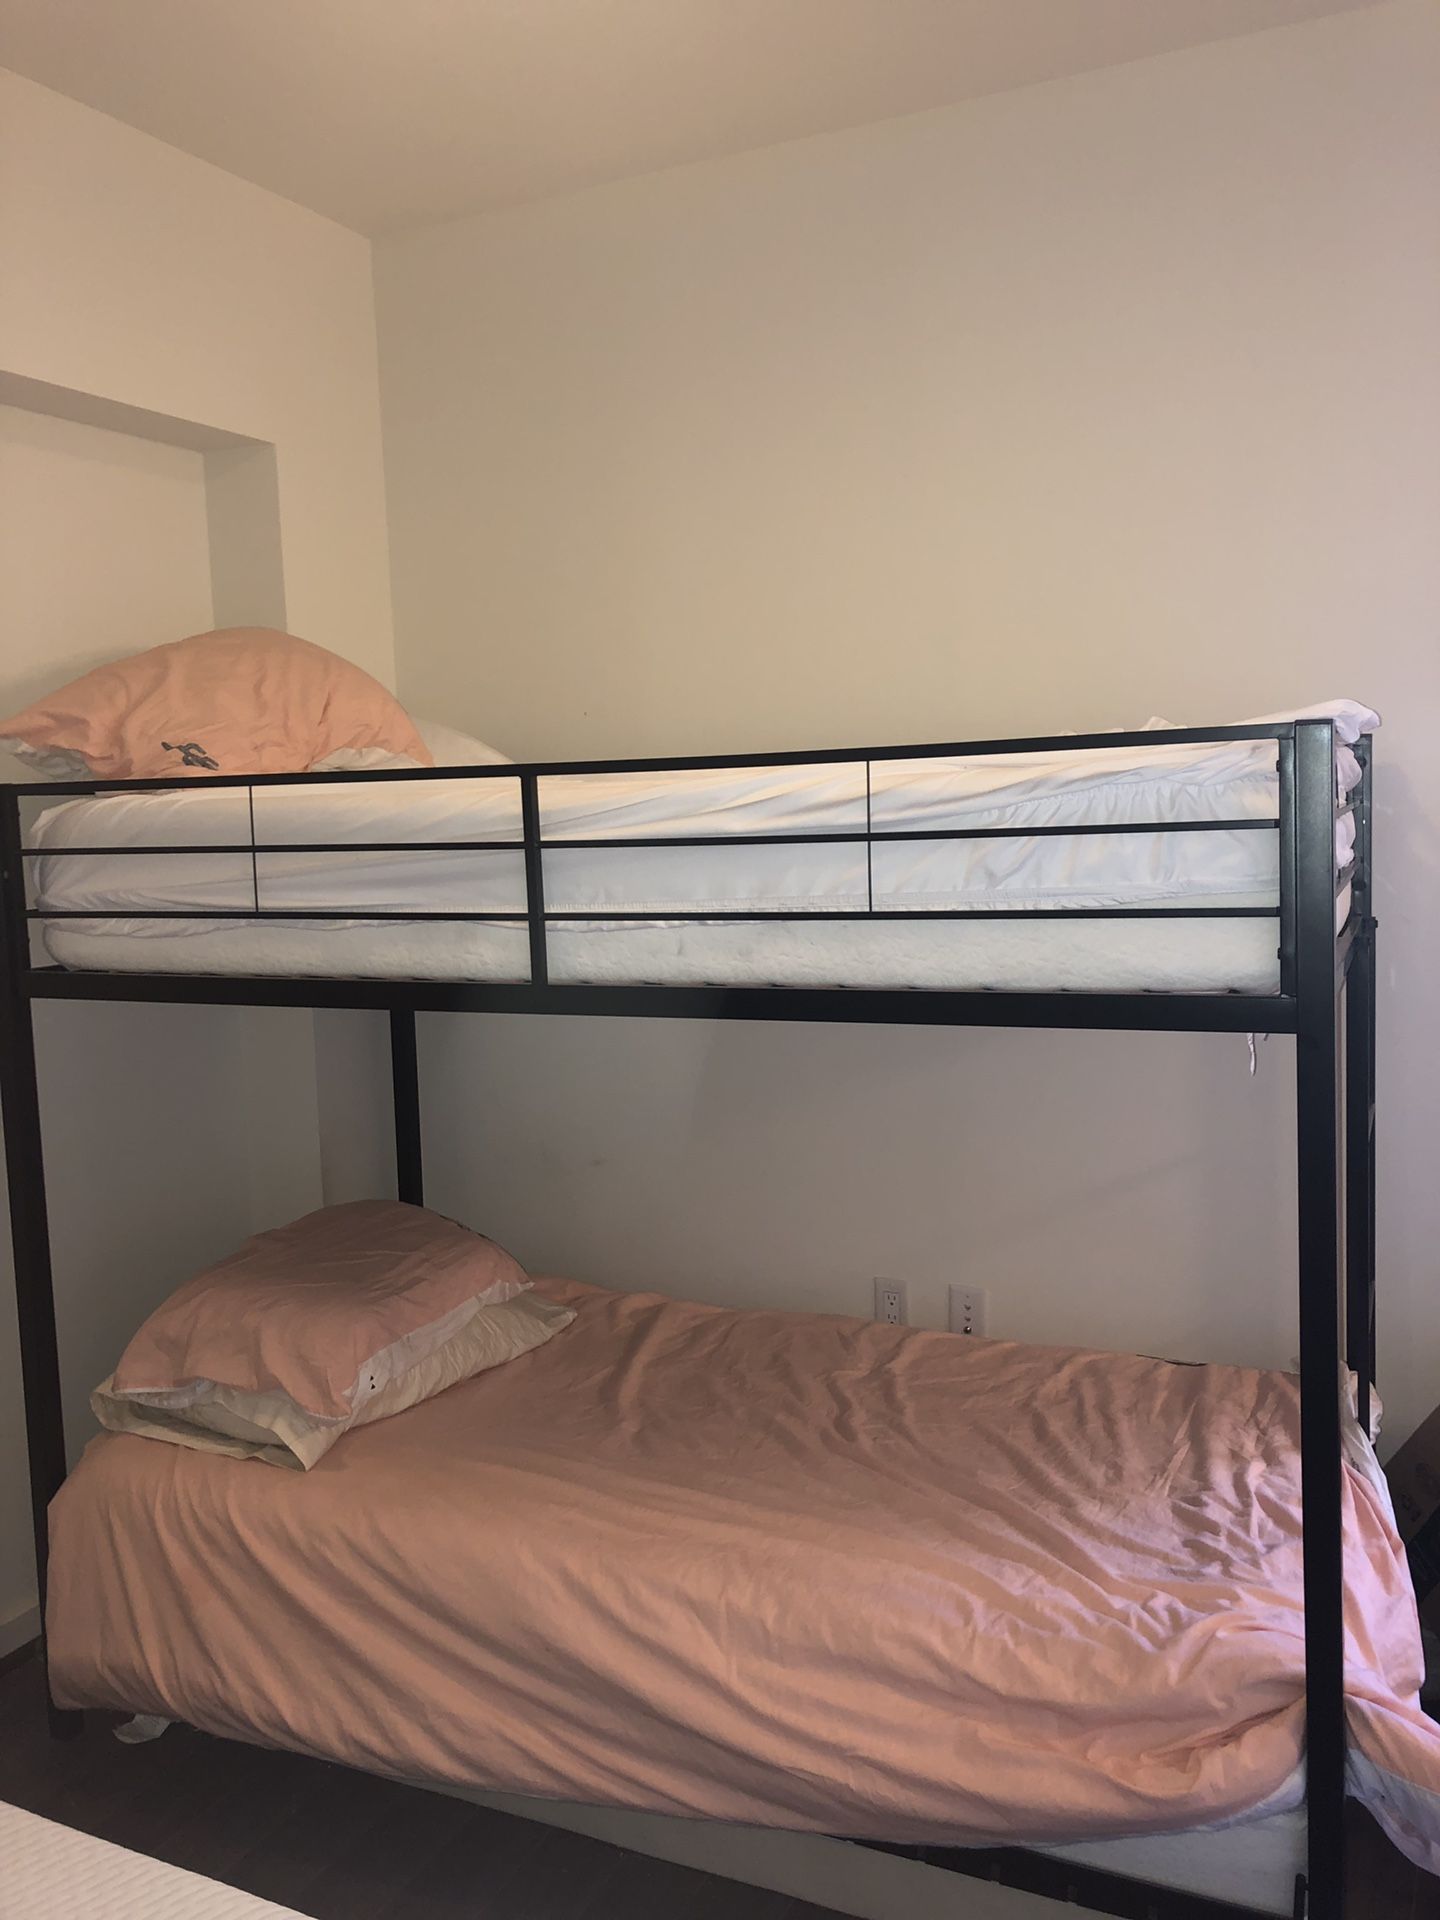 Two memory foam mattresses and bunk bed